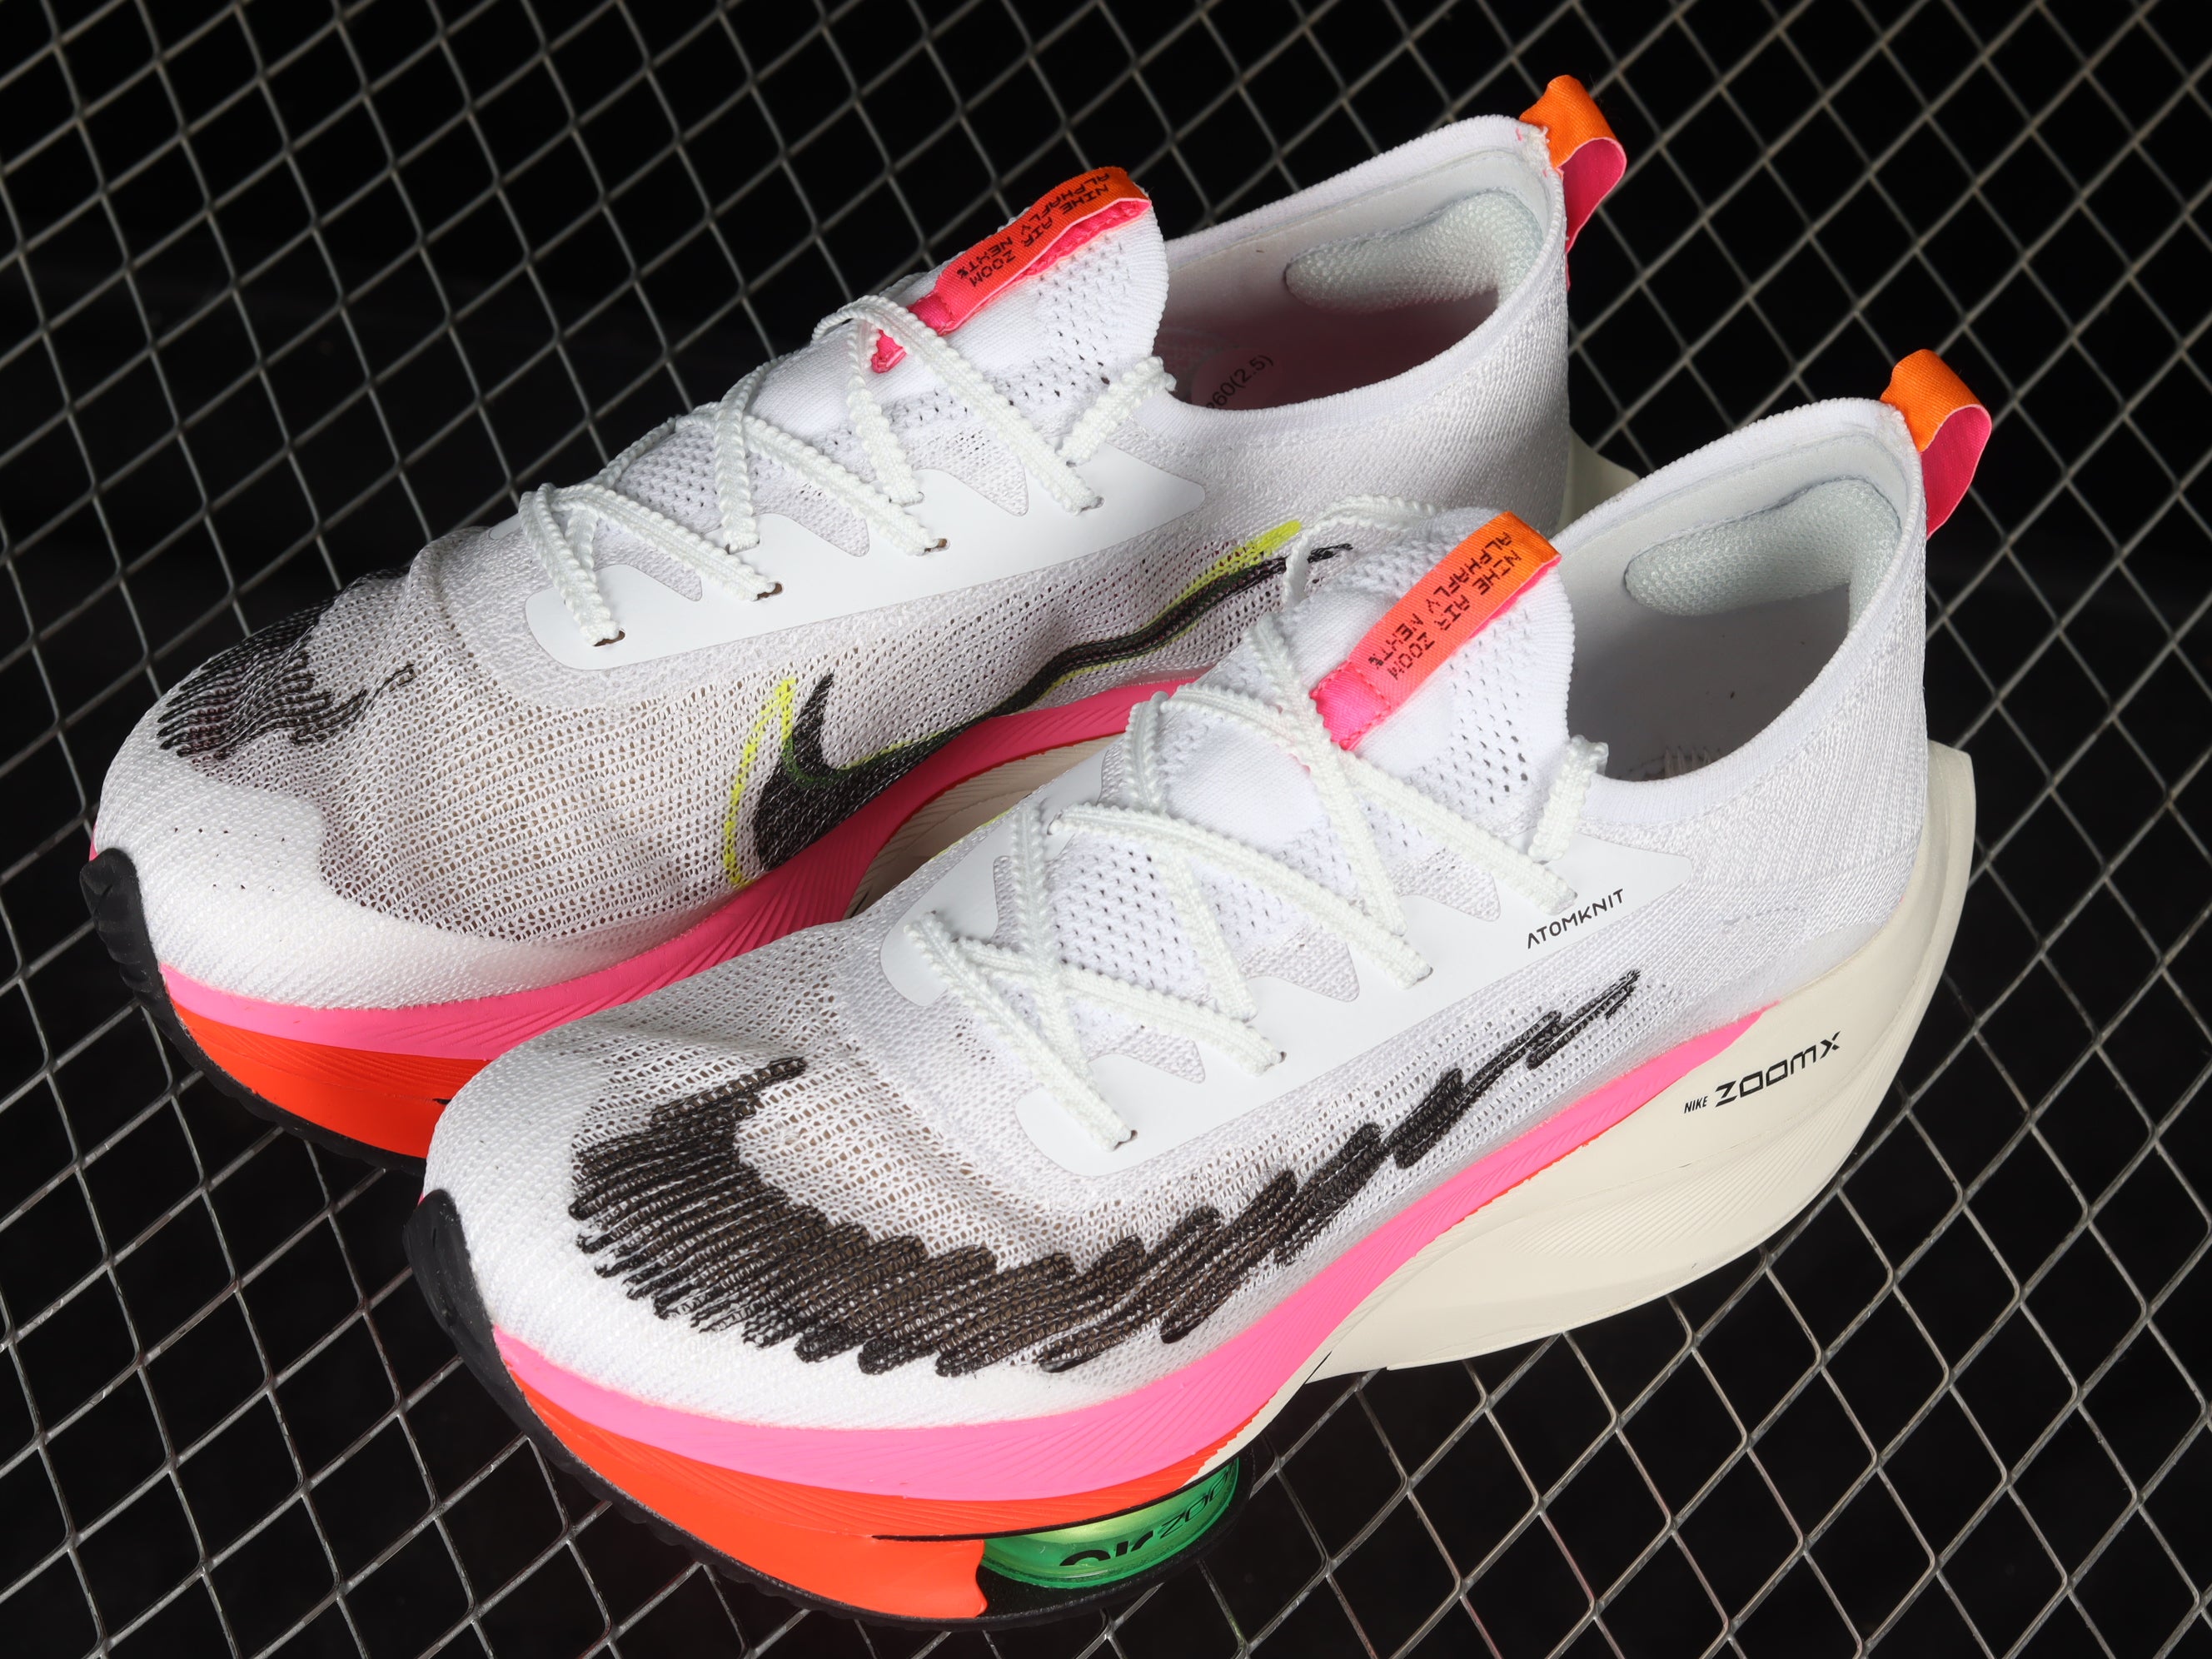 Air Zoom Alphafly NEXT% 2 "Pink"